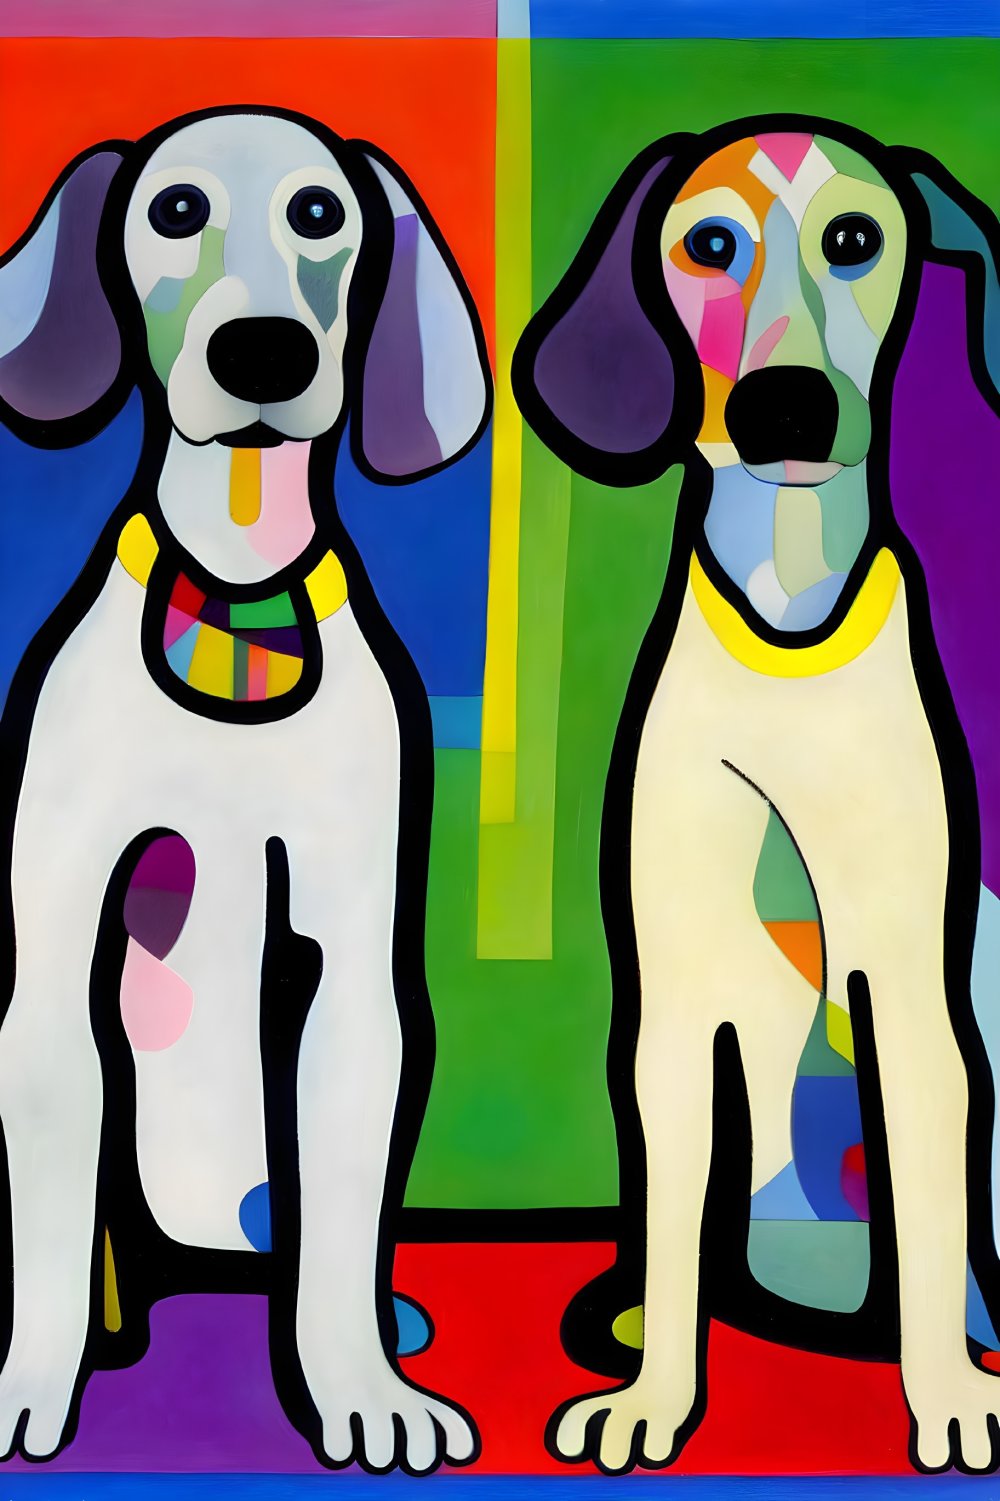 Stylized colorful dogs with abstract patterns on vibrant background